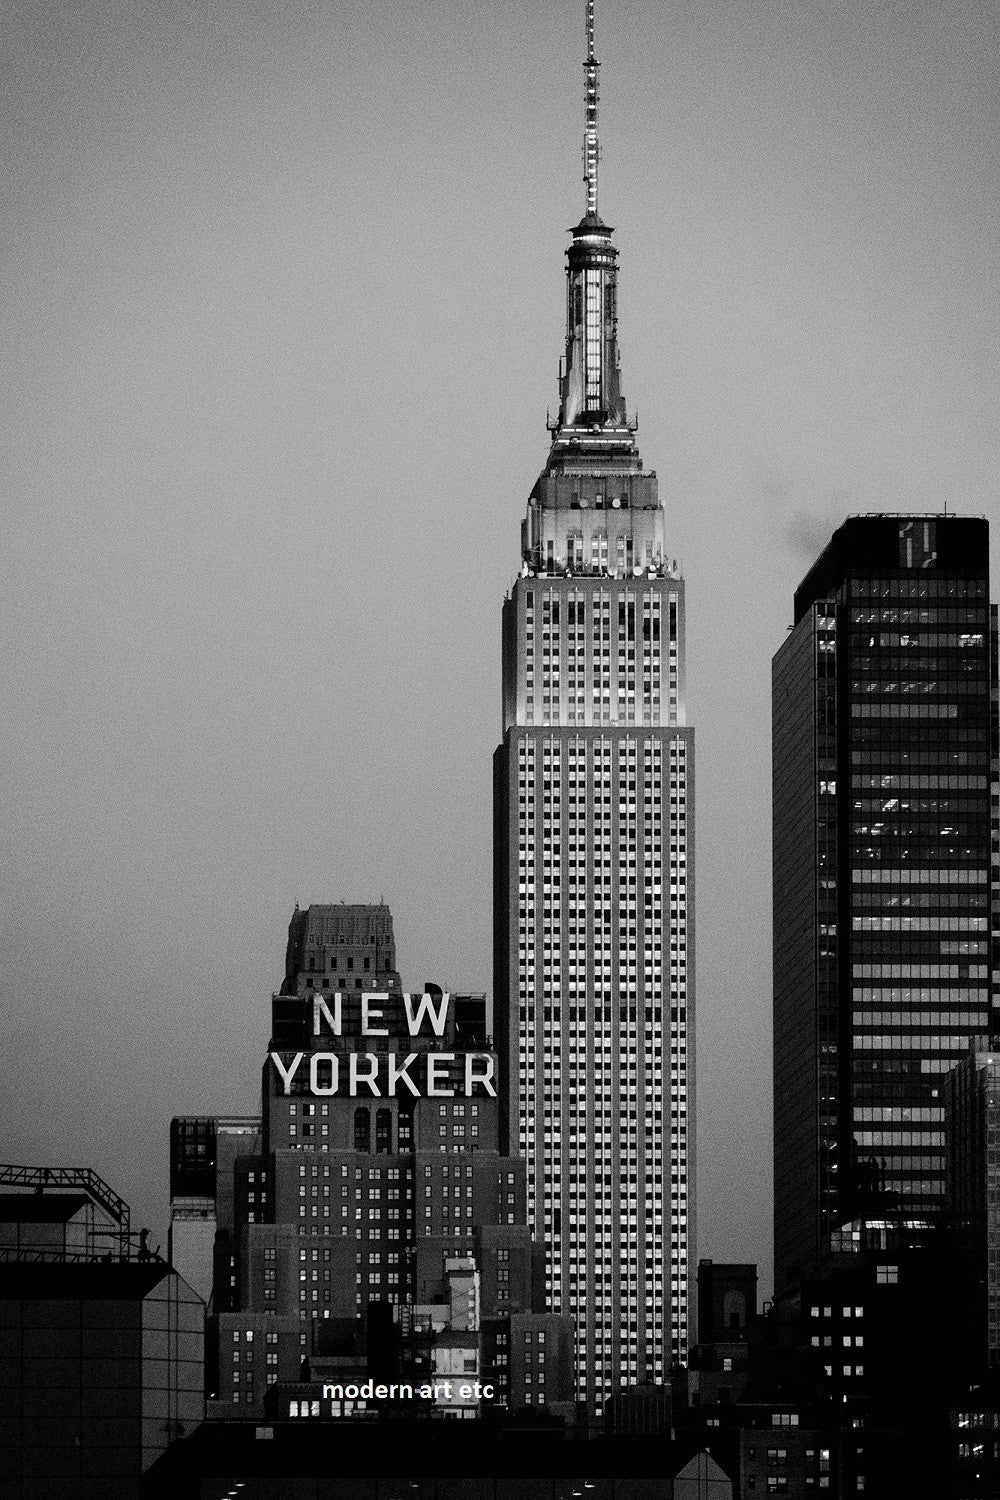 New York City Architectural Landscapes – 28 New Yorker Skyline (Vertical)